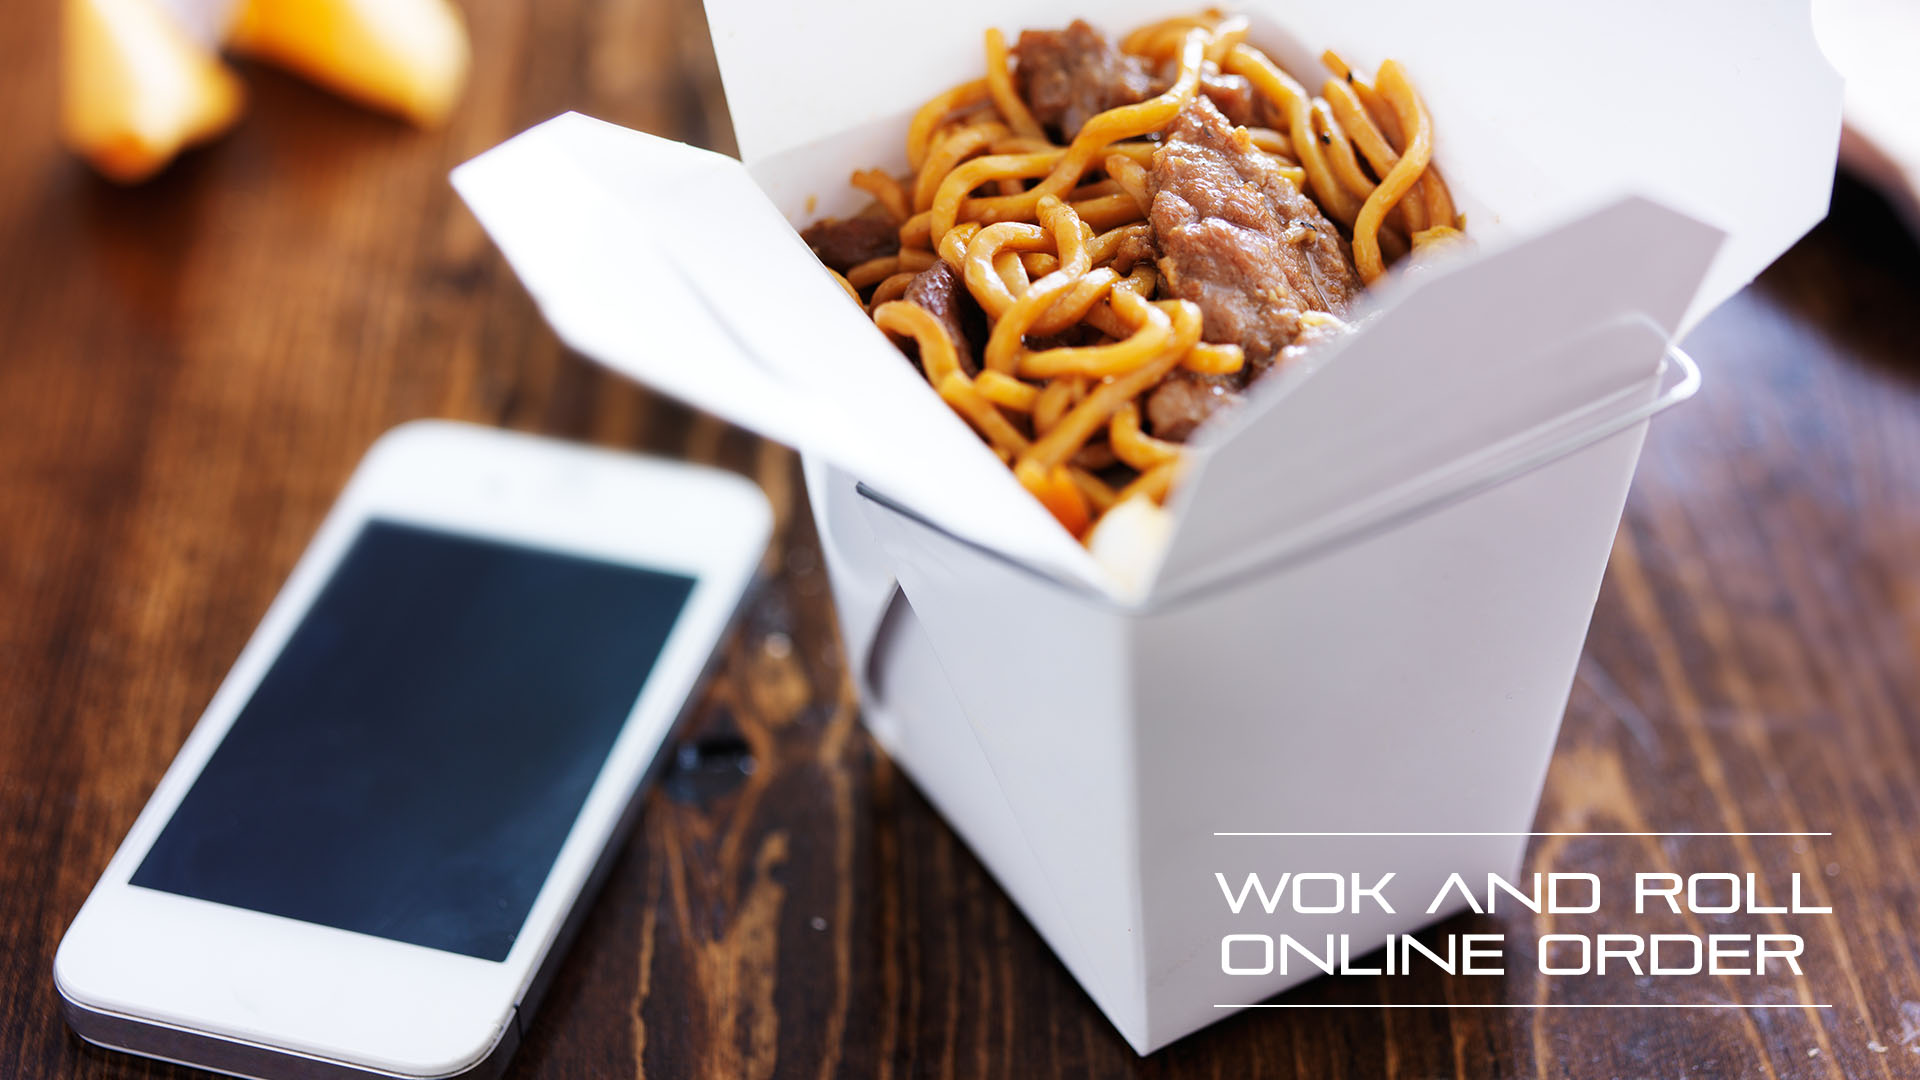 Online Order, Our delivery service is FREE when you order online.